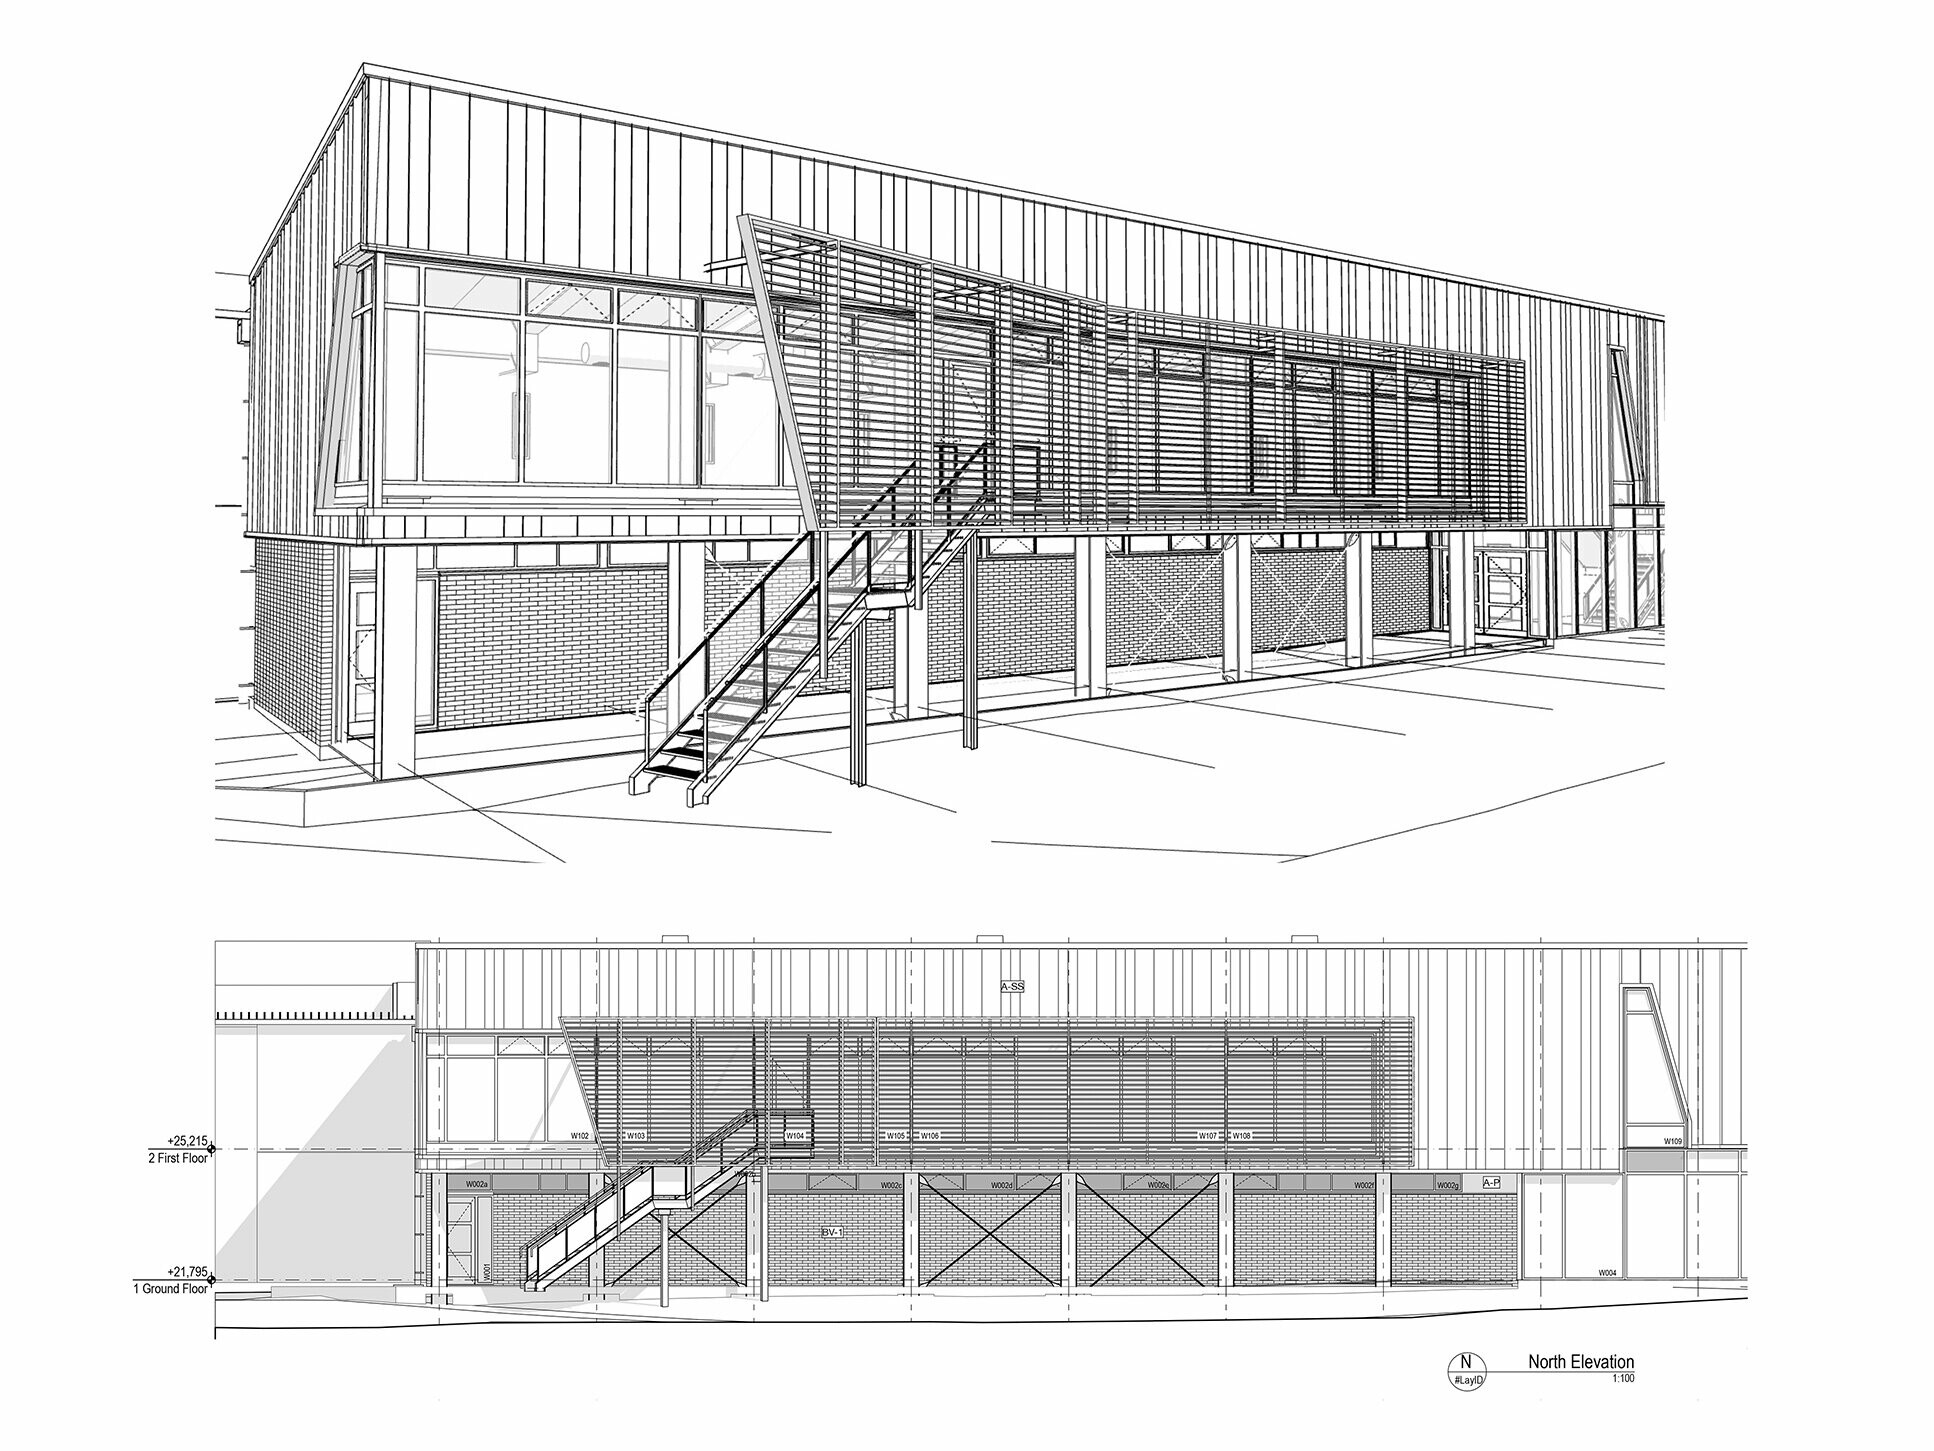 Plan of the fitness centre building.